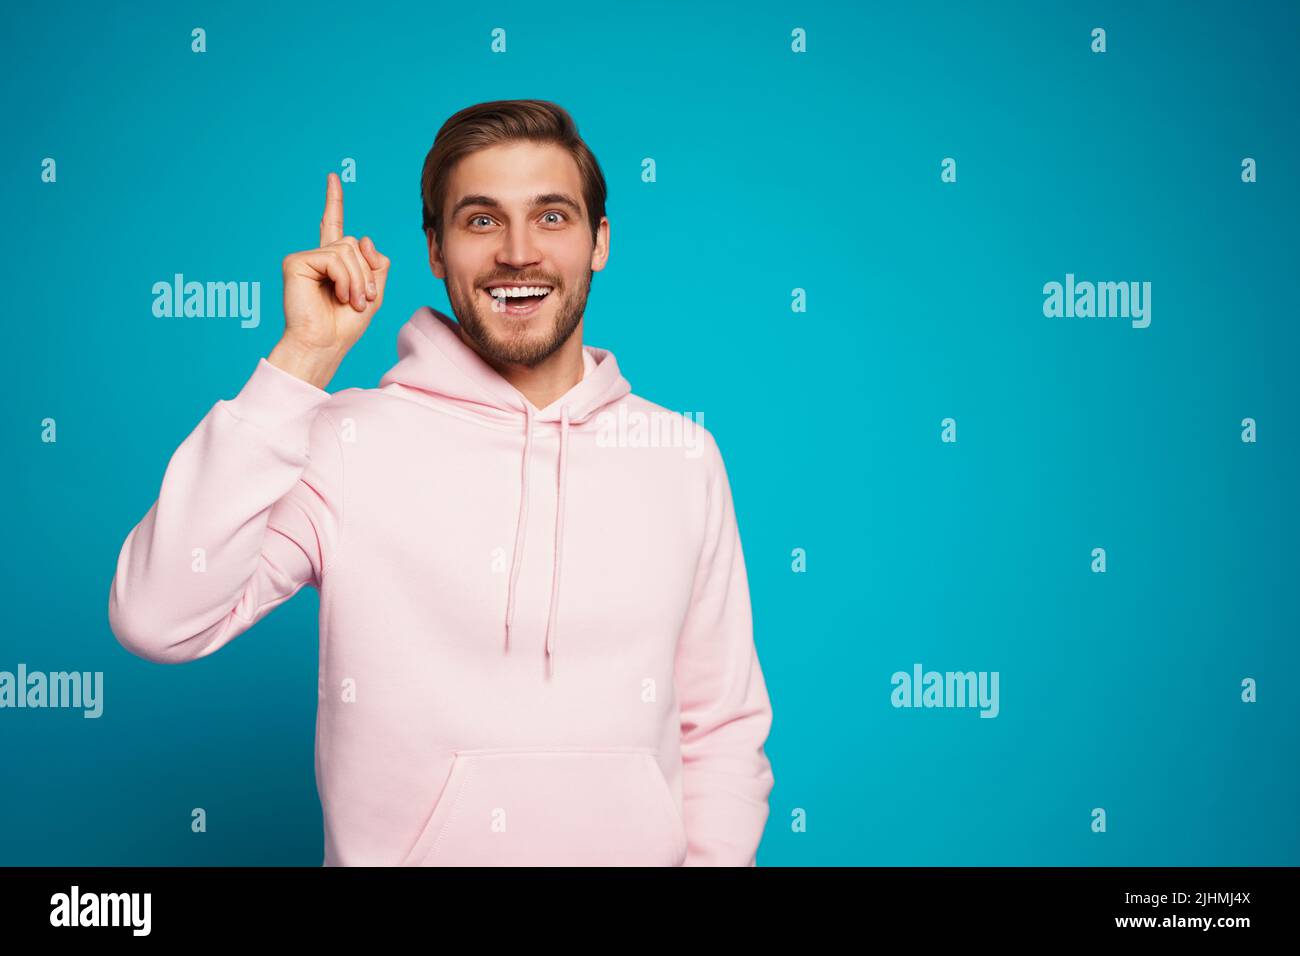 Portrait of an excited happy man pointing finger up at copyspace isolated on a light blue background. Stock Photo